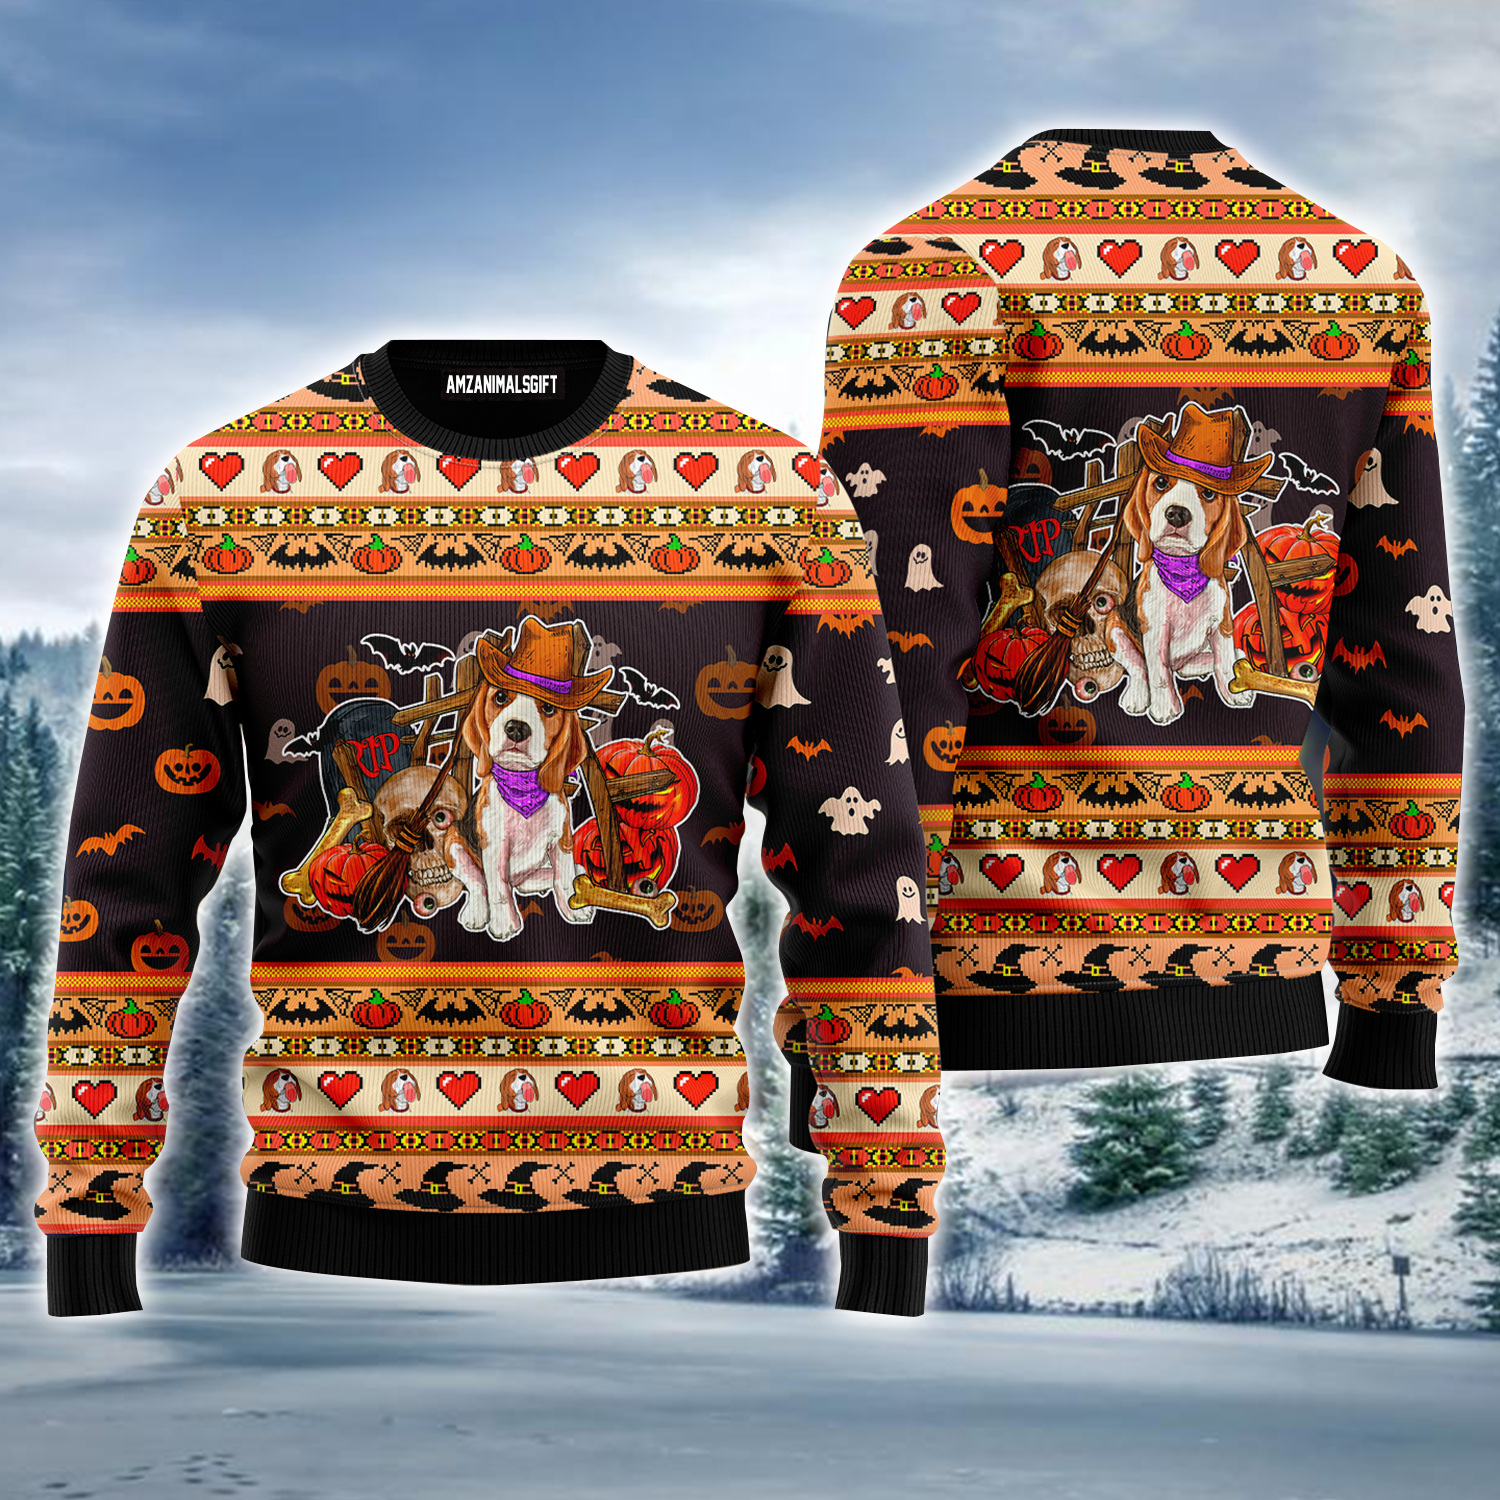 Beagle Dog Ugly Sweater, Halloween Funny Beagle Dog & Pumpkin Ugly Sweater For Men & Women, Perfect Gift For Beagle Lovers, Friends, Family